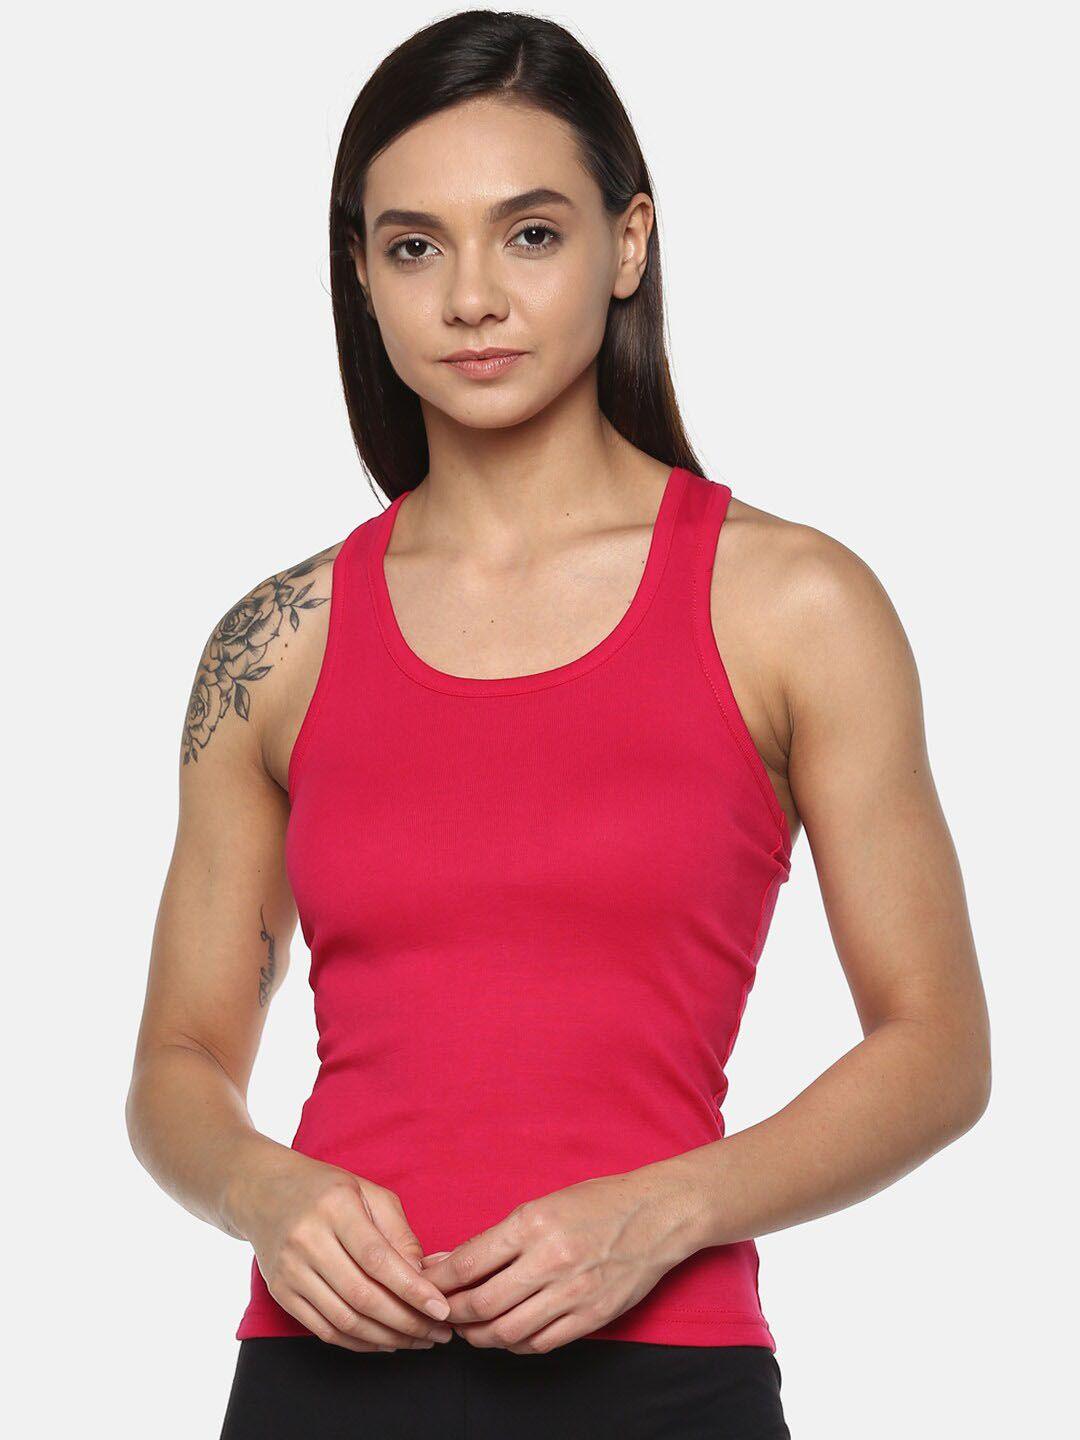 dressberry non padded pure cotton camisole